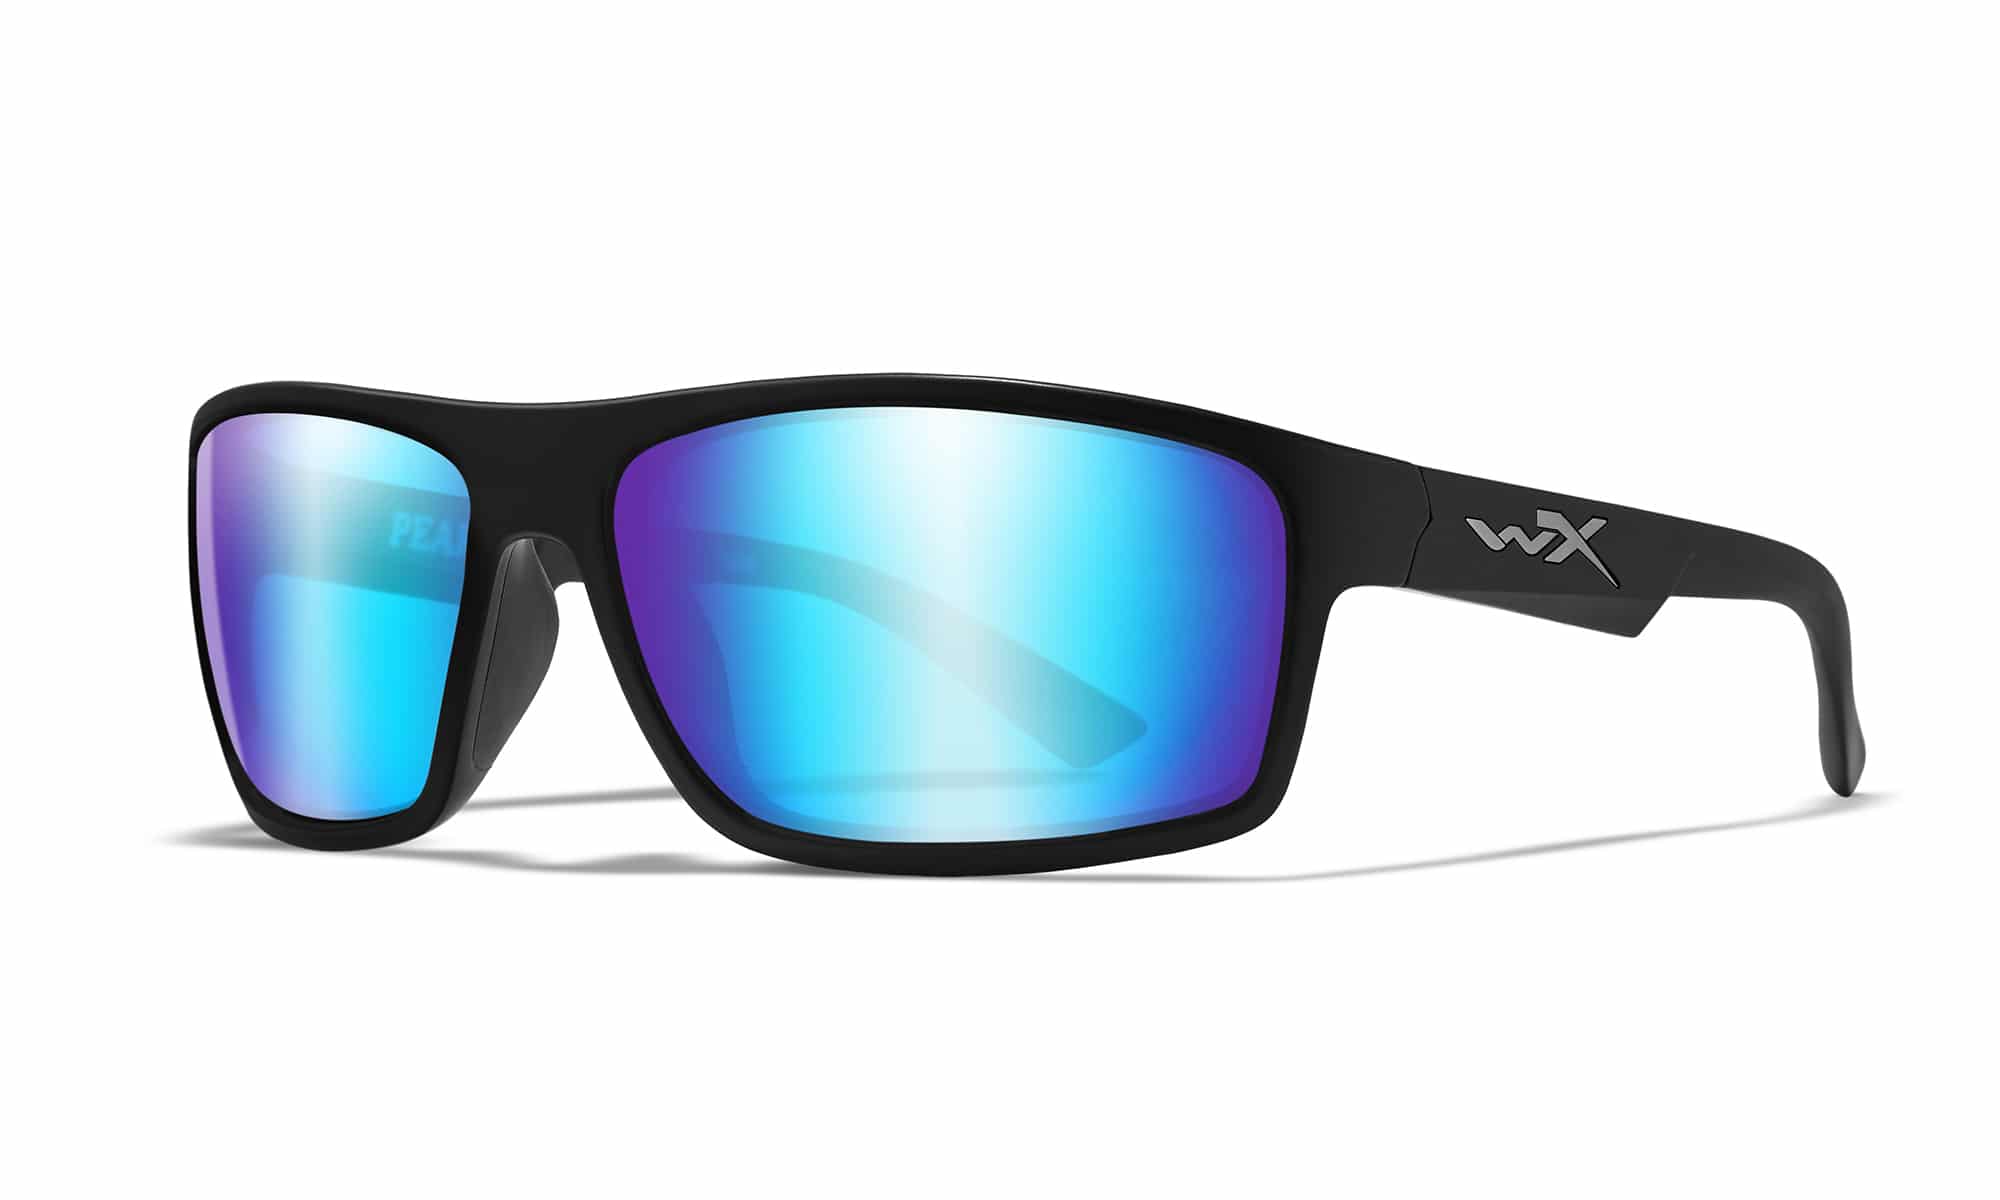 B Force Sports Polarised Sunglasses for Men Women Driving Cycling Mirrored Blue 